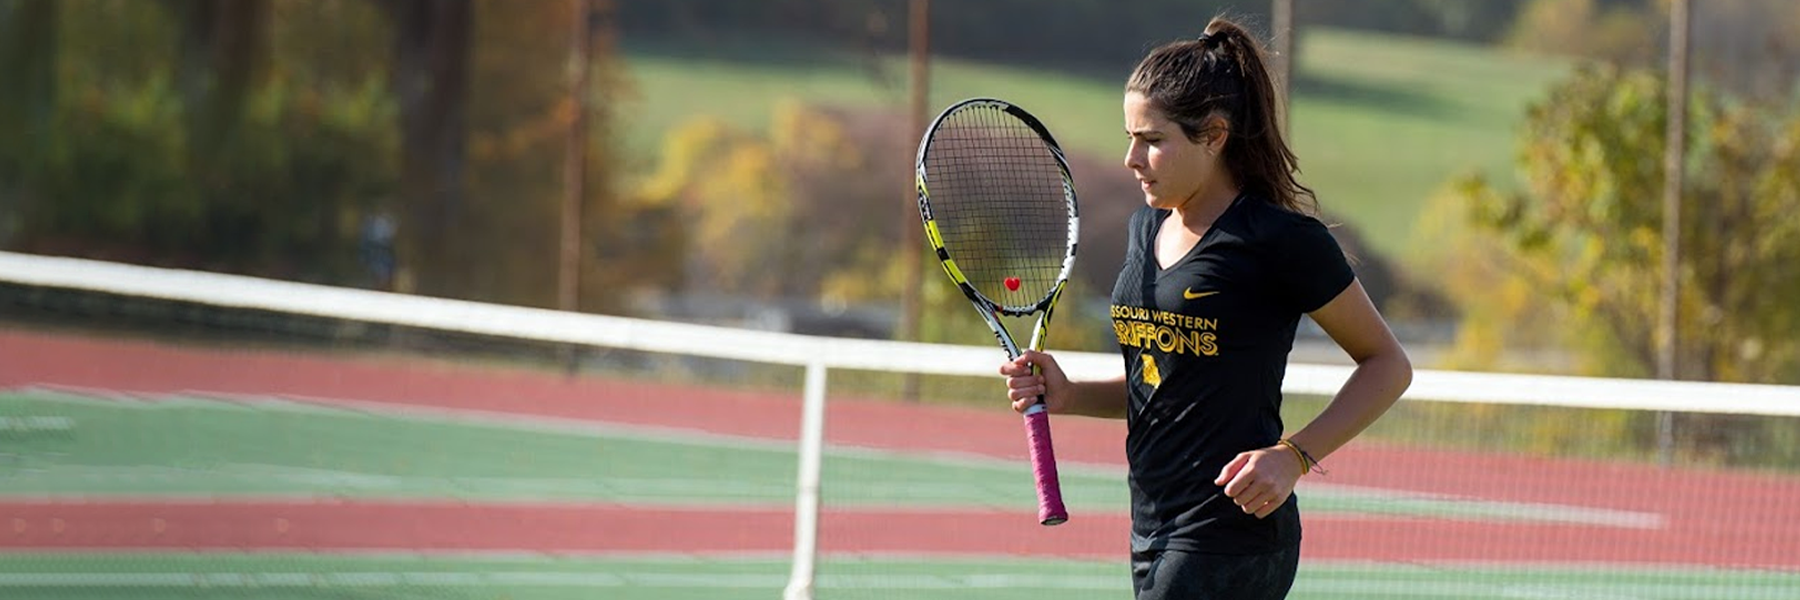 a student holding a tennis racket